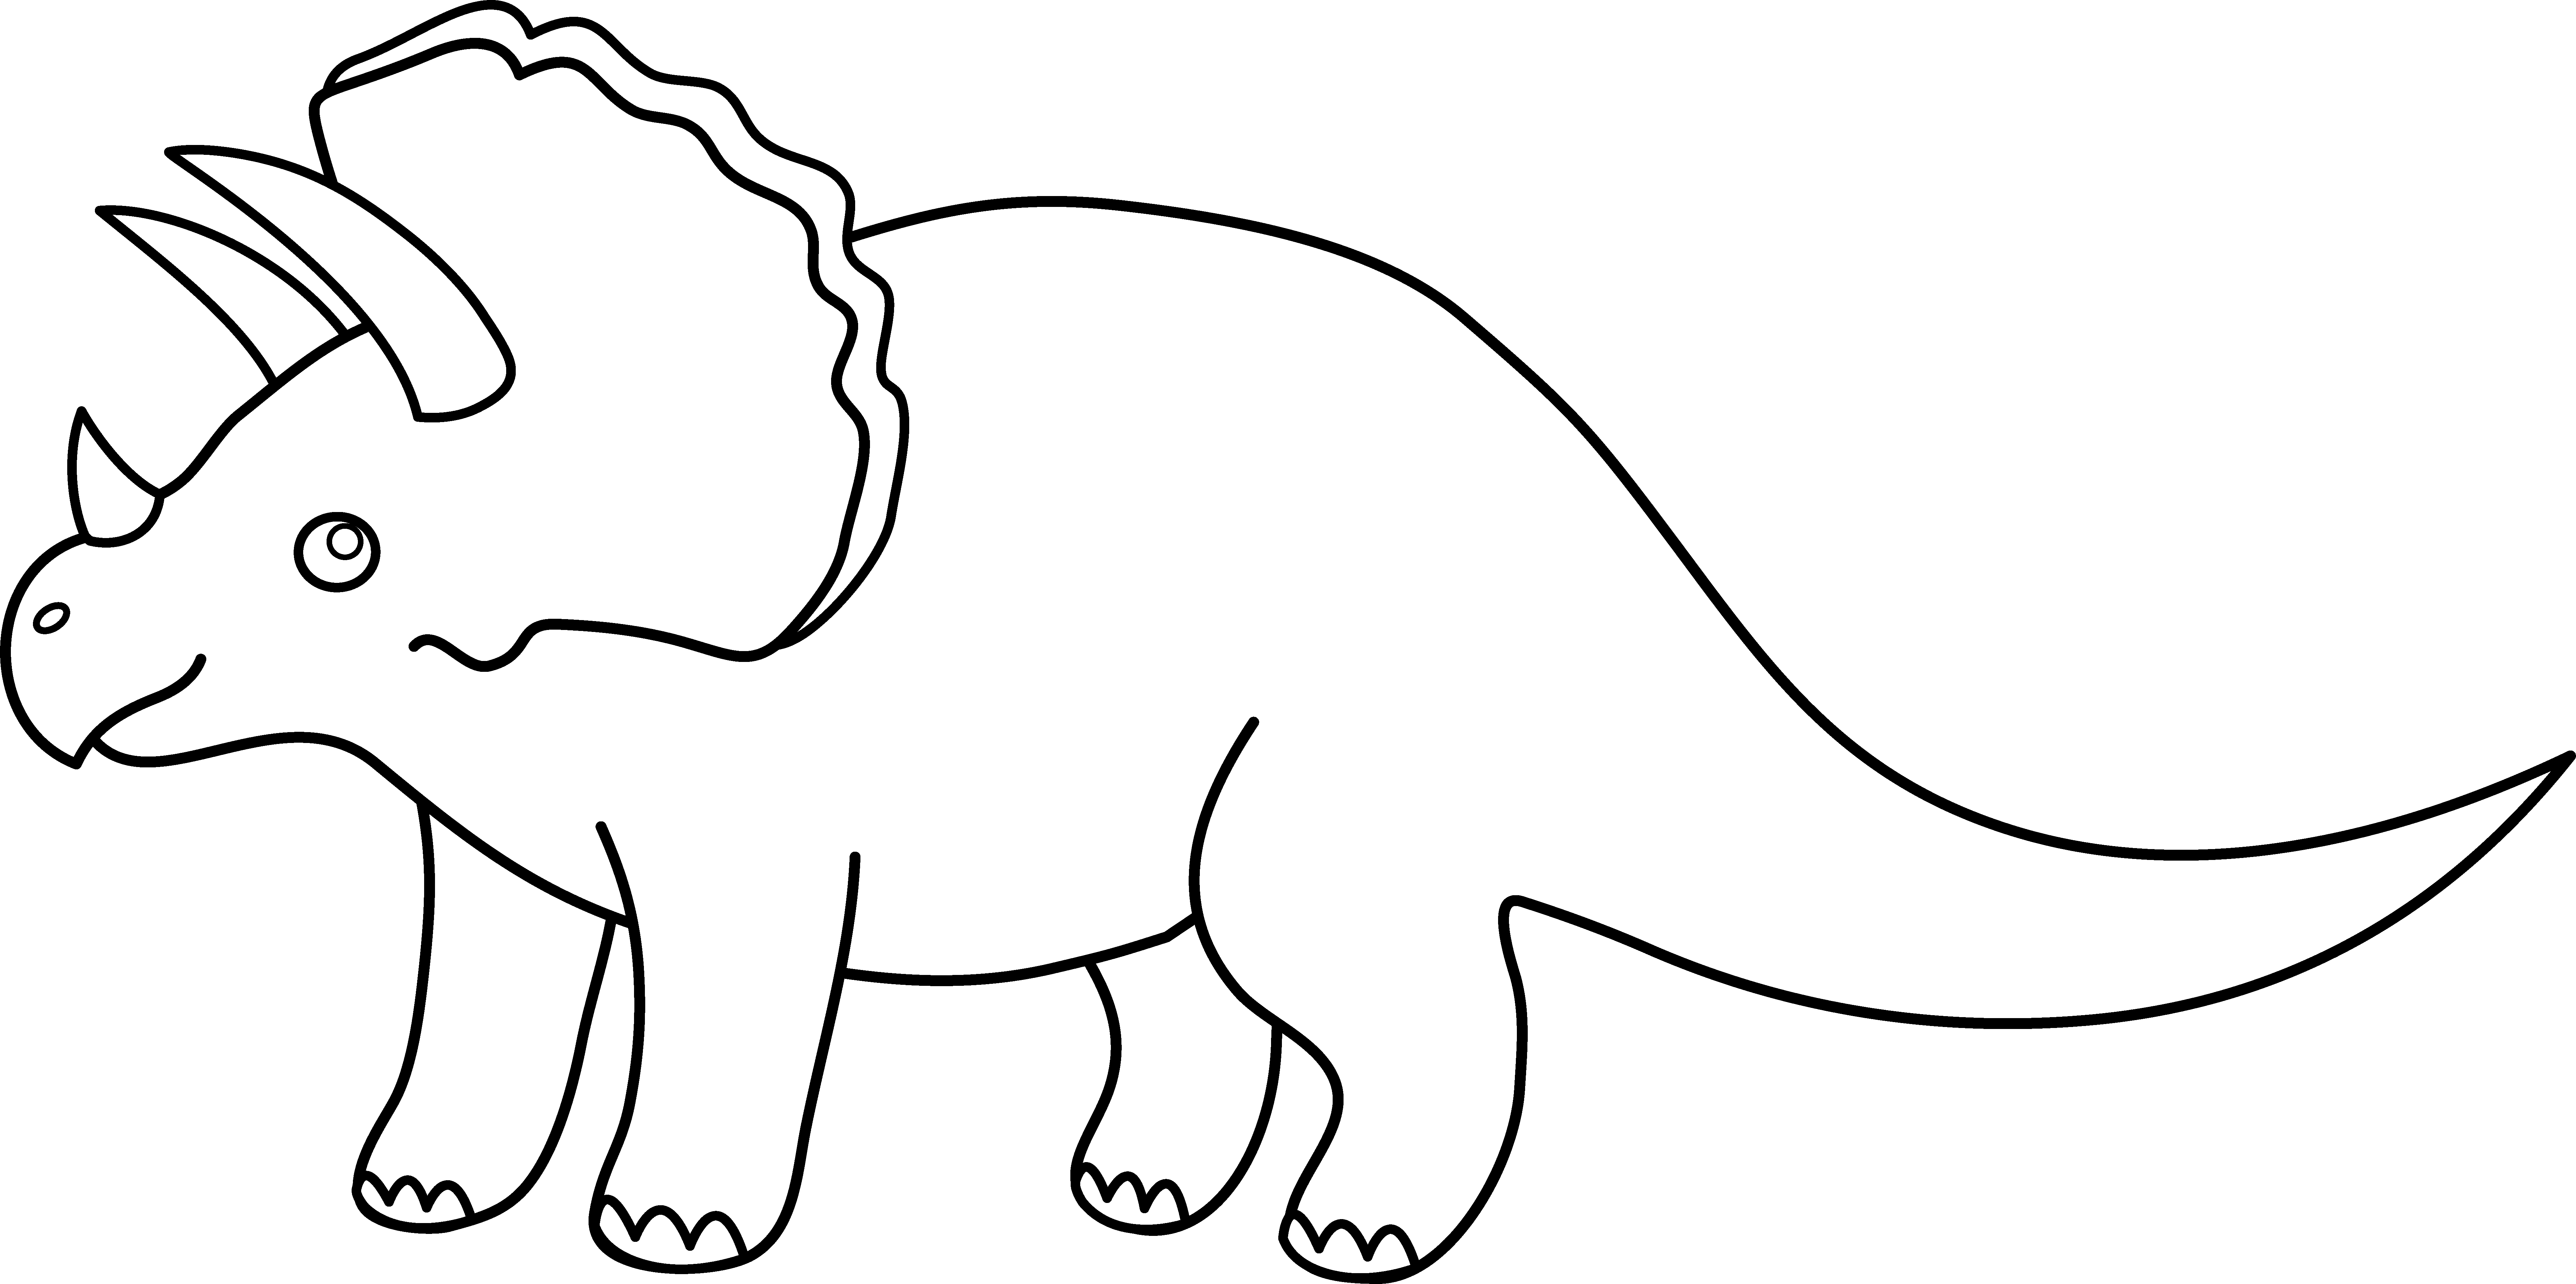 dinosaur-line-drawing-cliparts-co